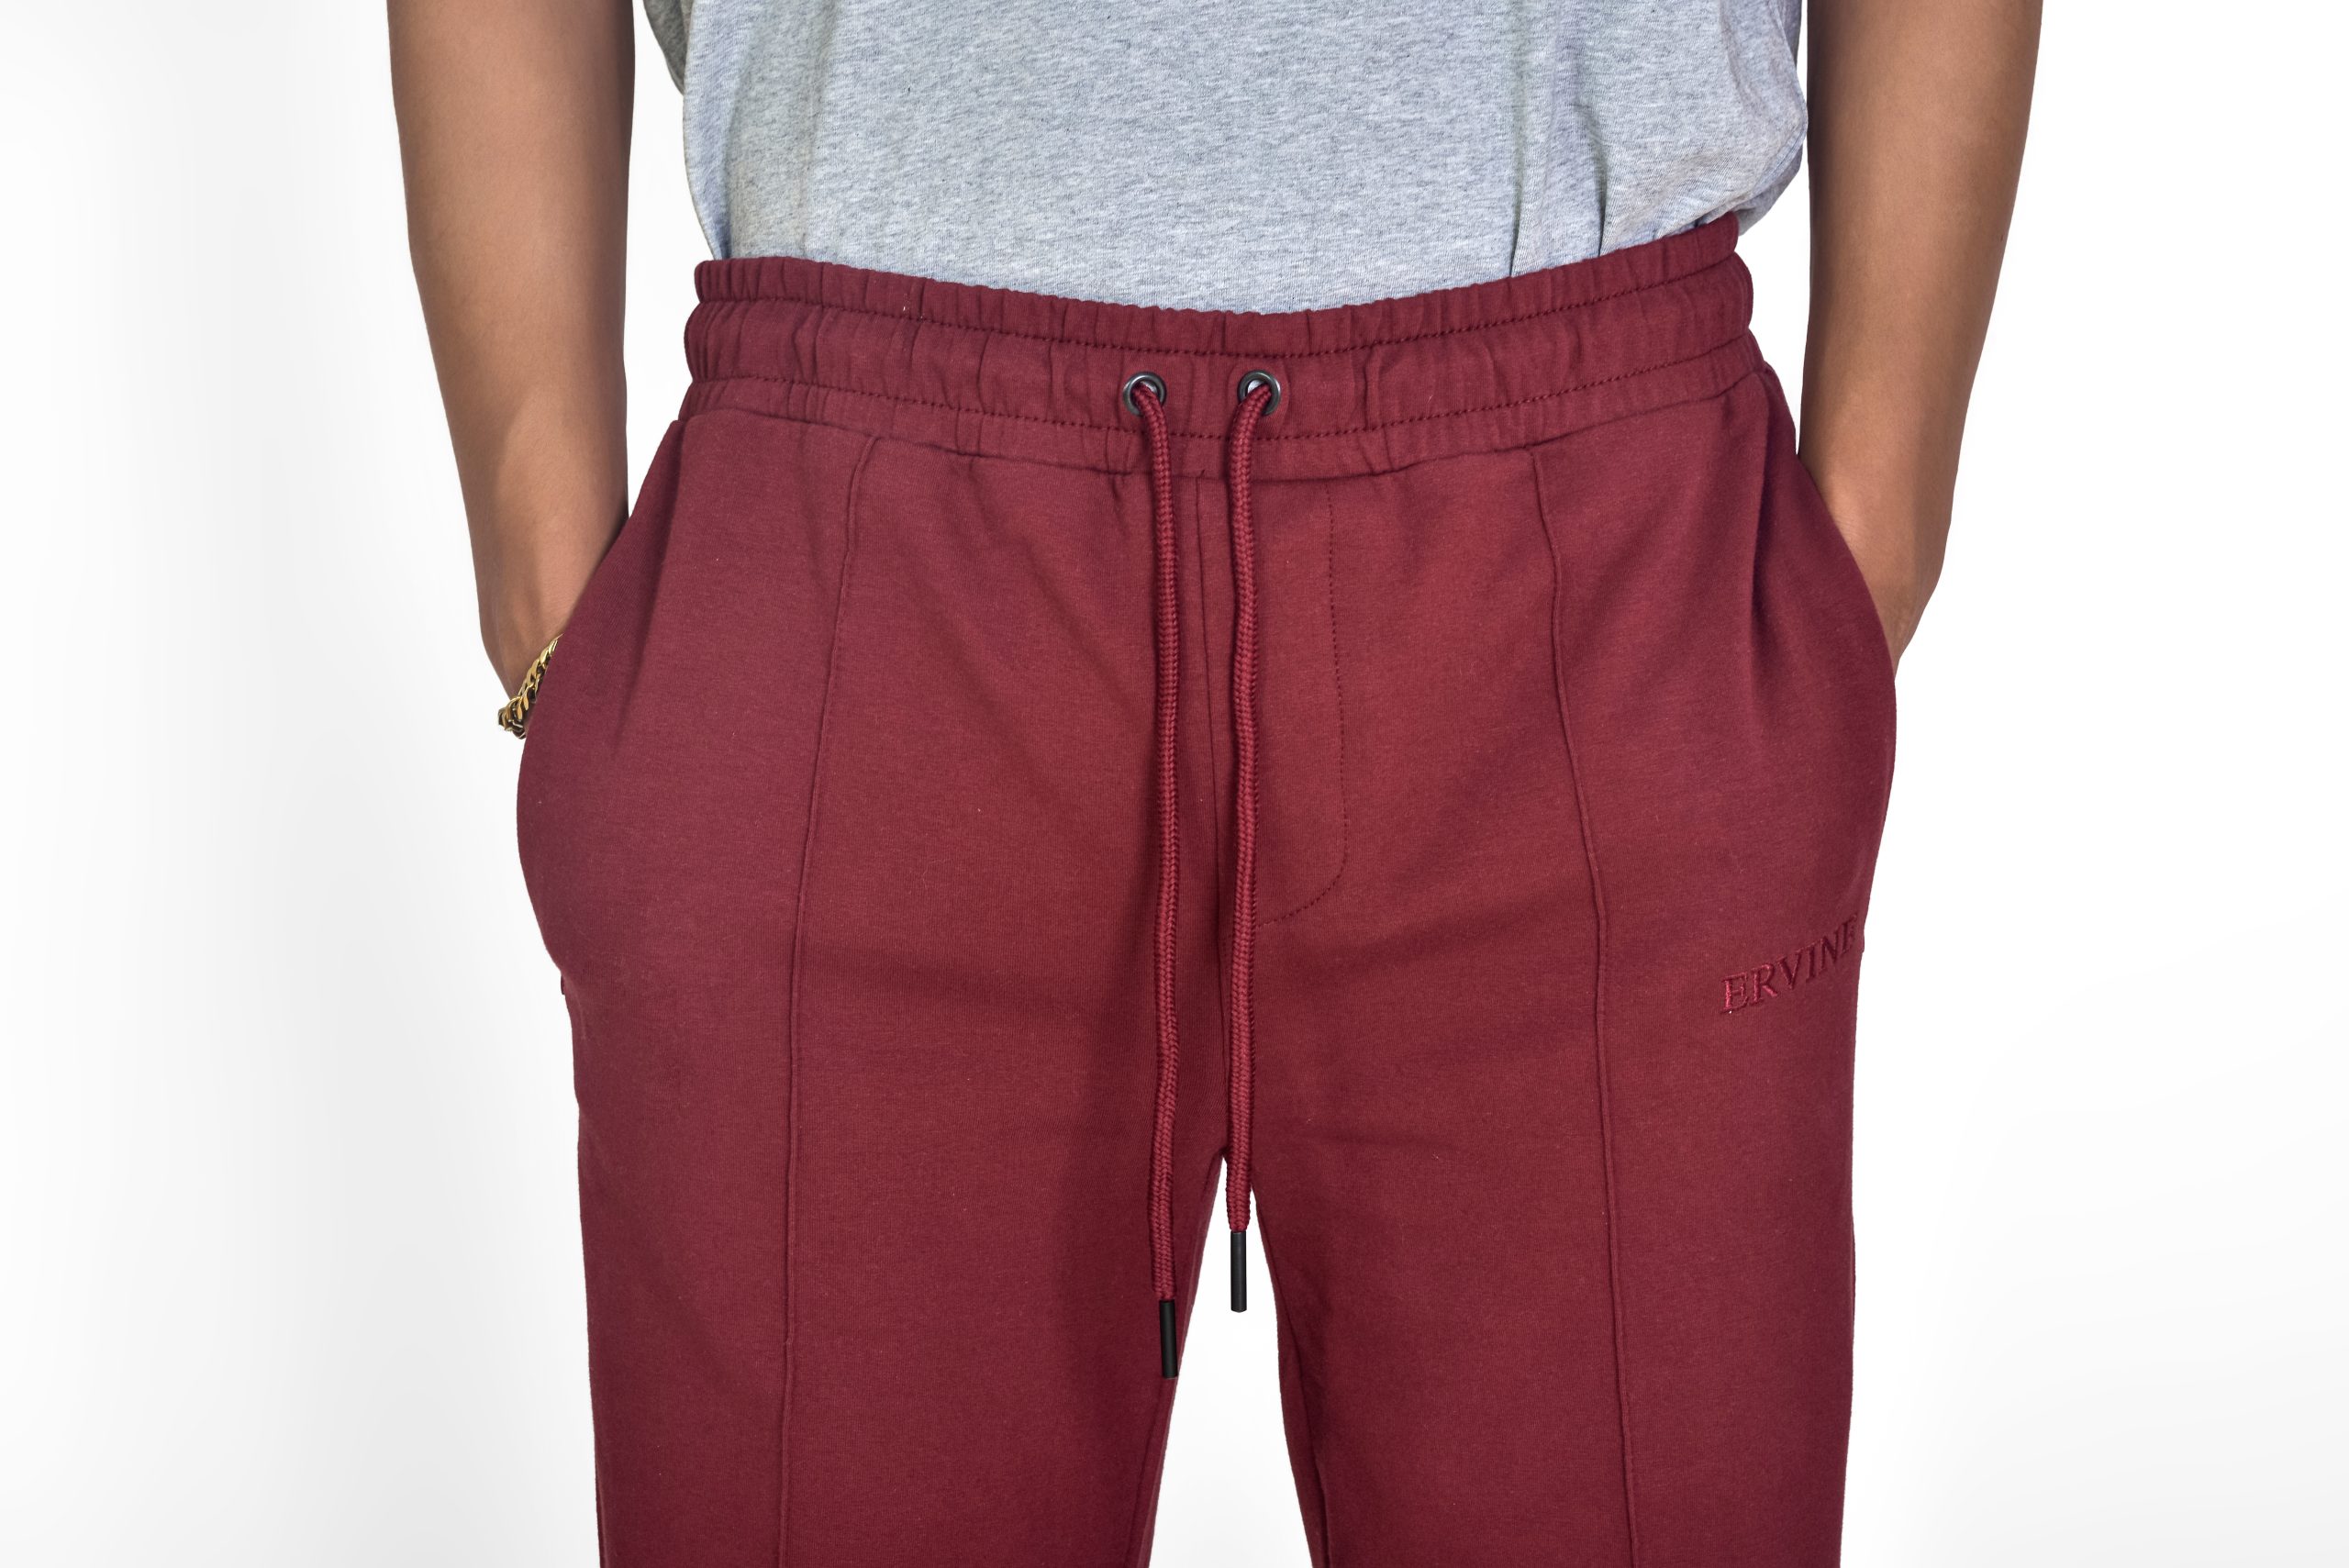 Wide Leg Slit Trousers in Maroon, close up photo of waistband and drawstring.